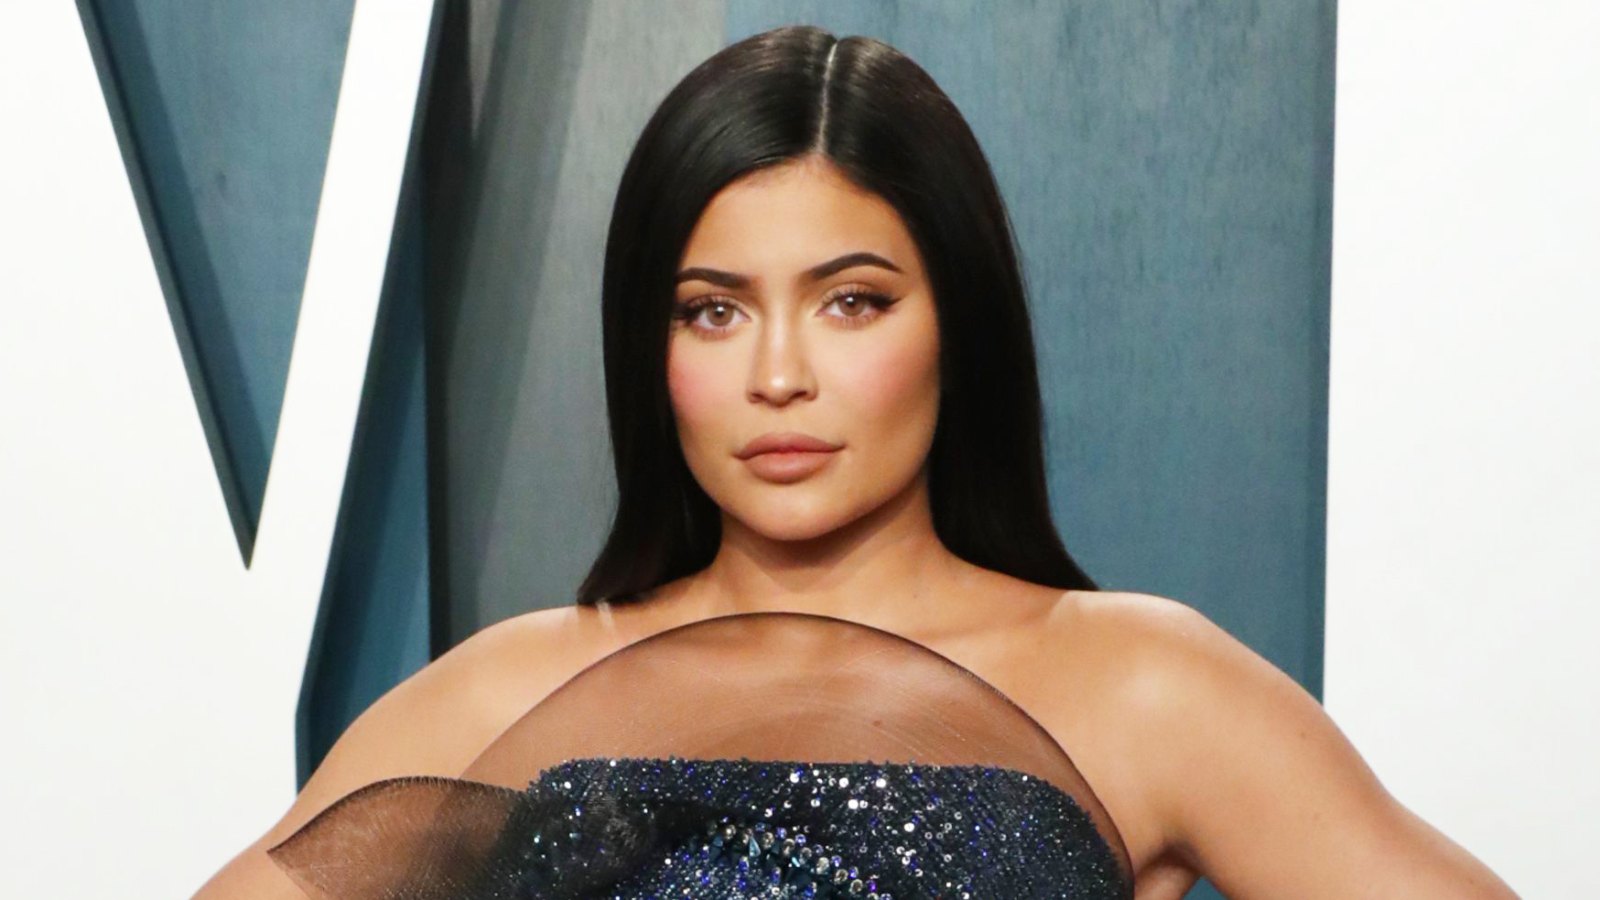 Kylie Jenner Prefers ‘Silent’ Sex Partner Over One With ‘Weird’ Accent